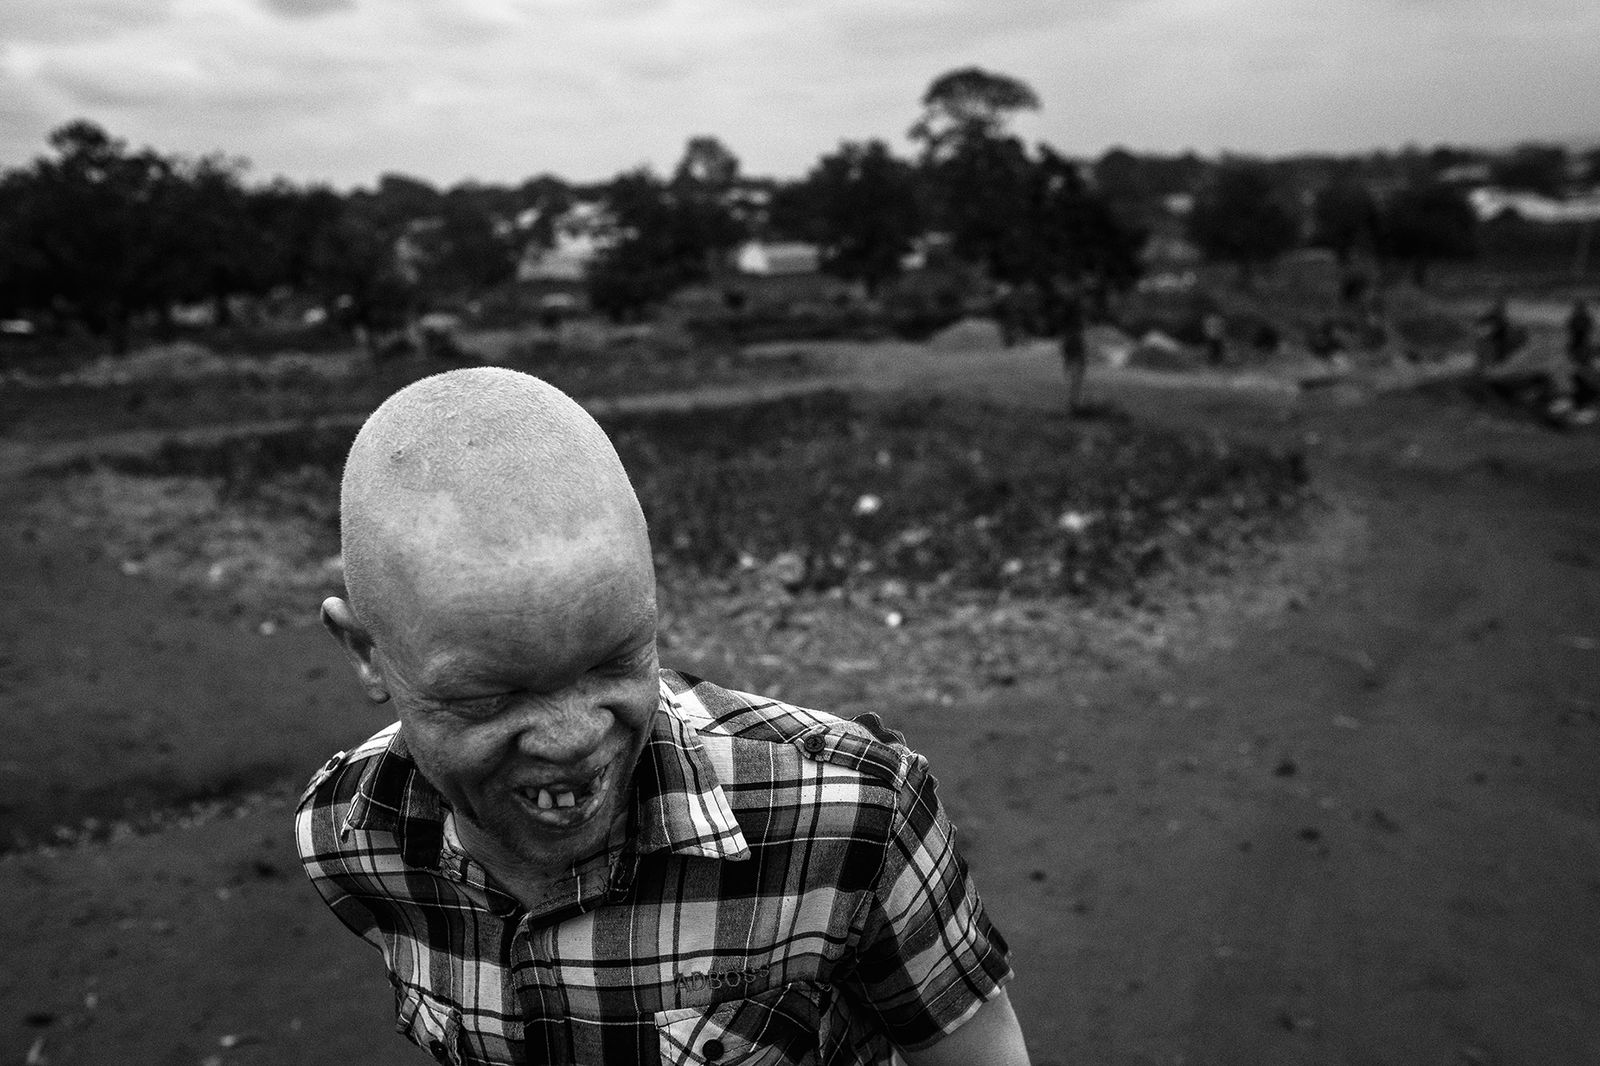 © Daniel Rodrigues - Image from the The hunted - albinos photography project